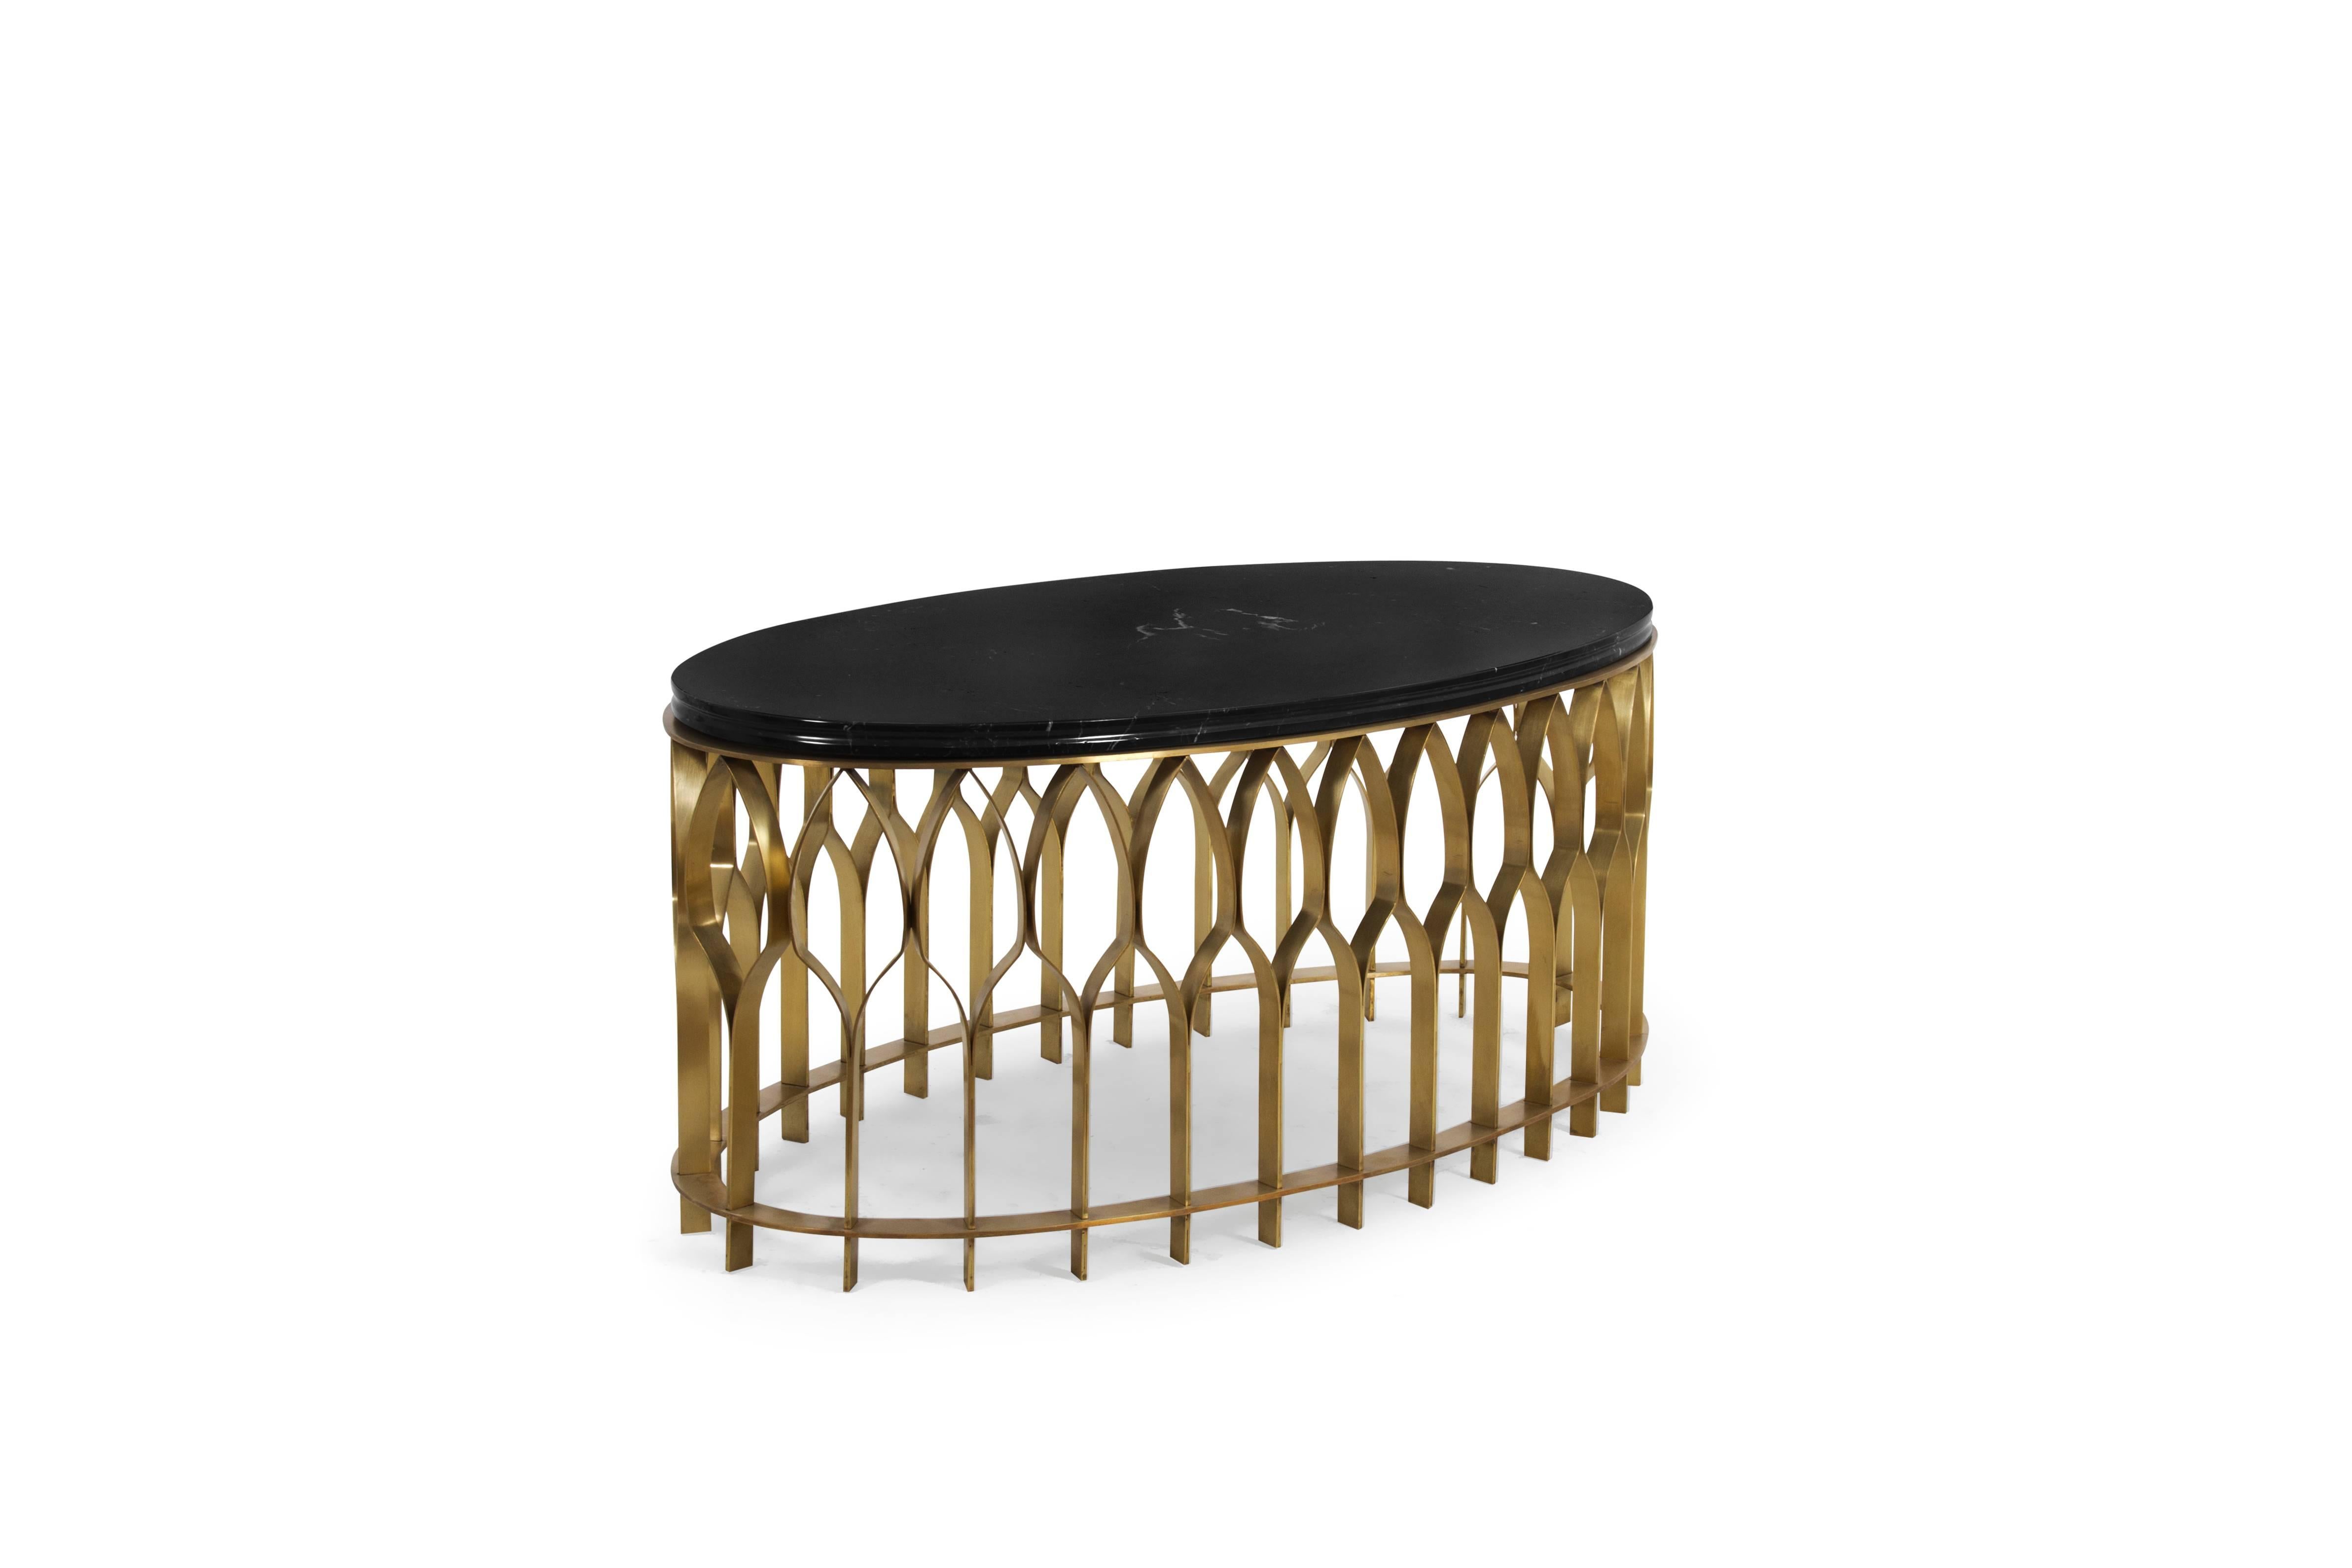 European modern Black Marble and Brushed Brass Round Coffee Table by Brabbu In Excellent Condition For Sale In Sydney, NSW